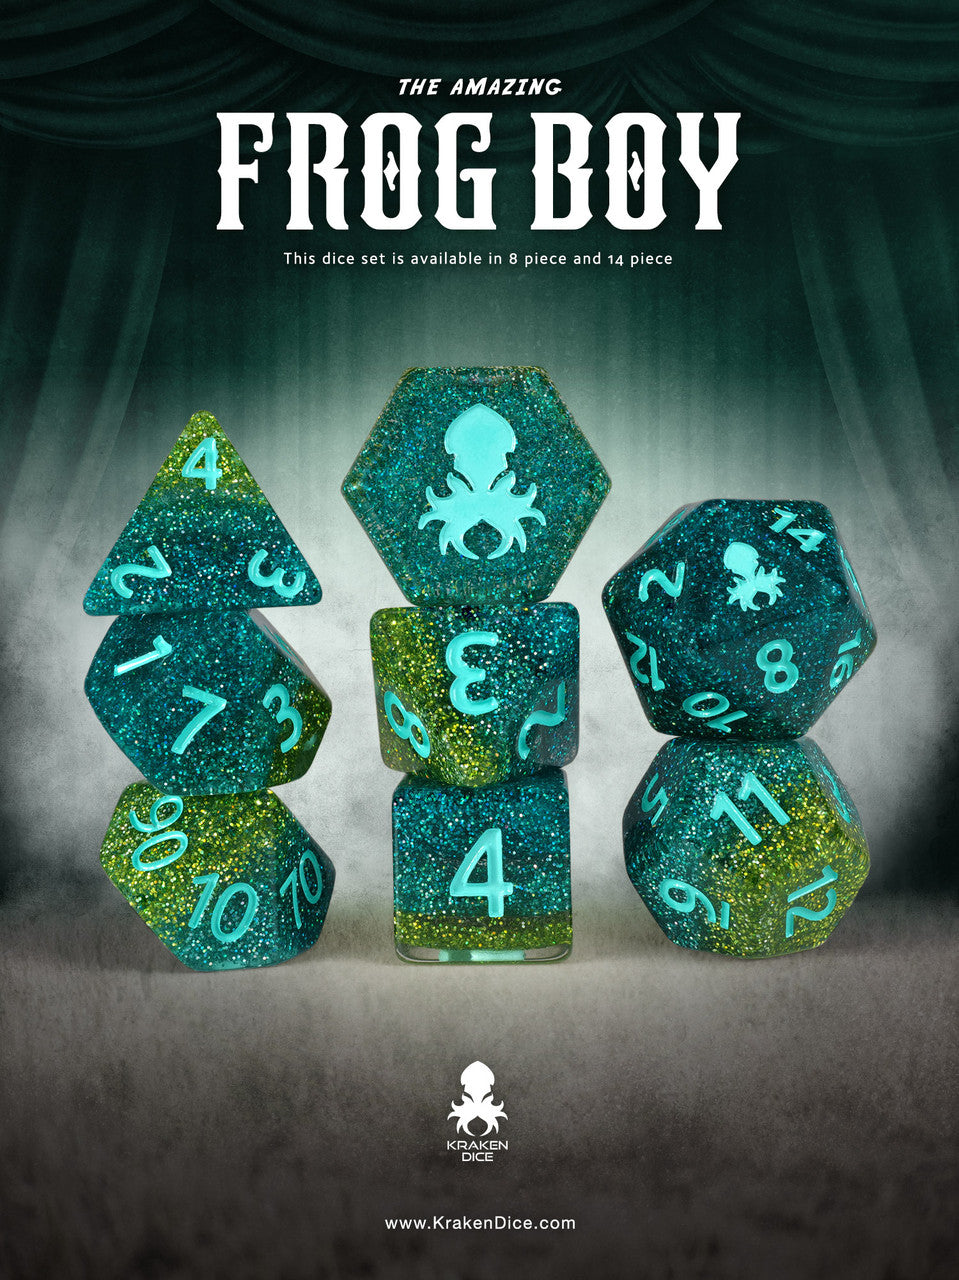 The Amazing Frog Boy 8pc Dice Set Inked in Teal